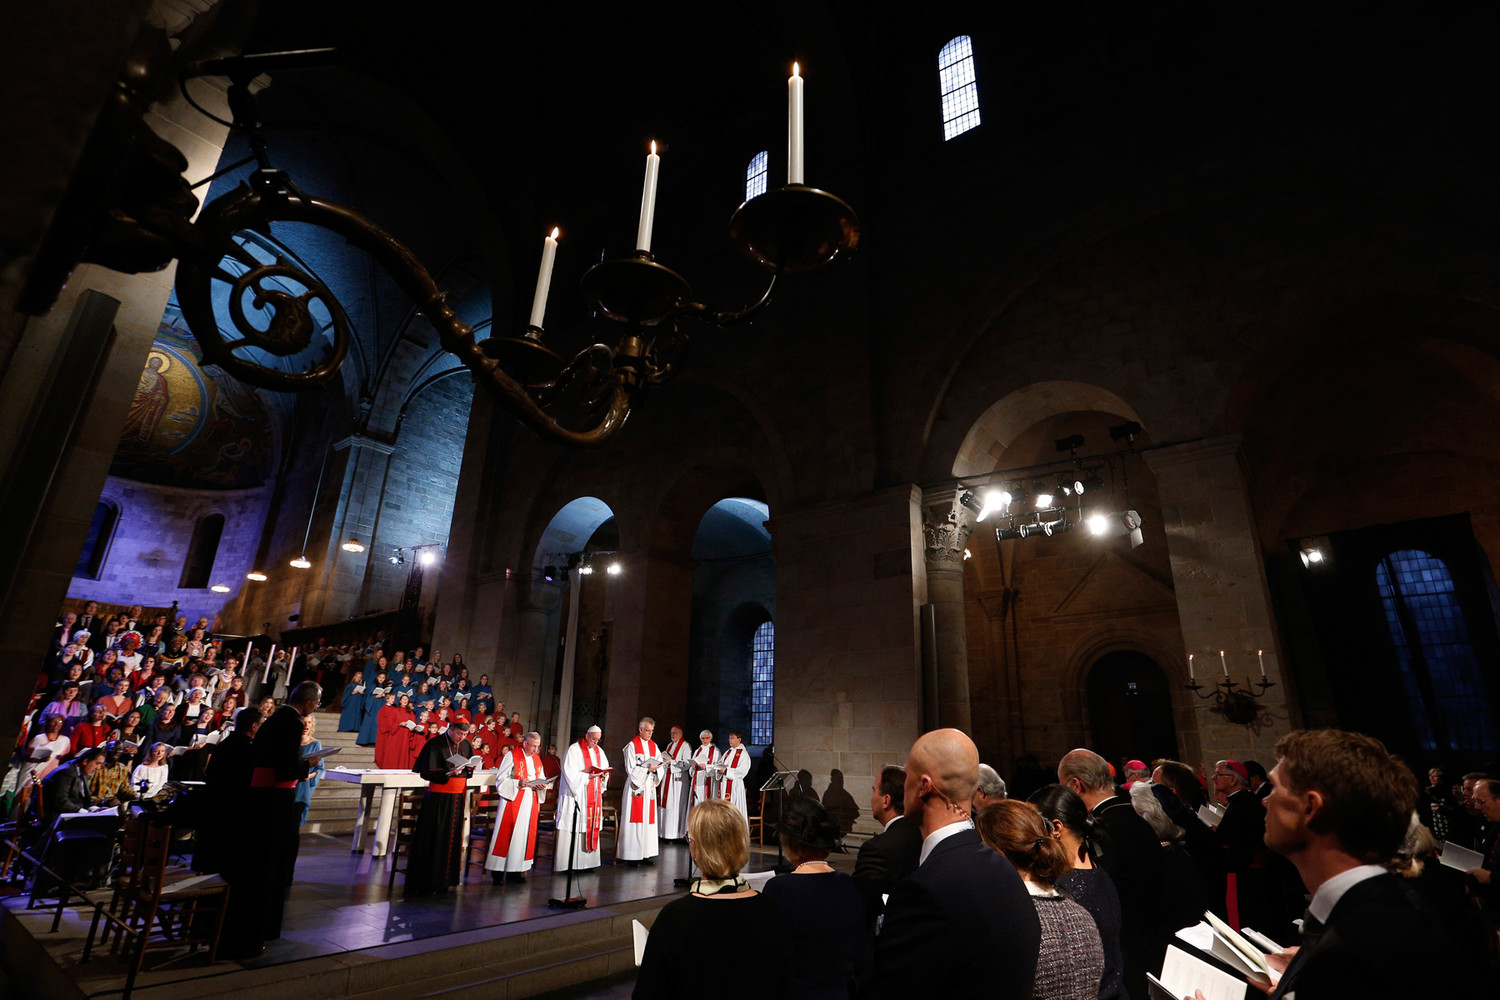 Pope Francis attends an ecumenical prayer service at the Lutheran cathedral in Lund, Sweden, Oct. 31. For the first time in 500 years, Lutherans in Sweden are welcoming Catholics to celebrate Masses in the cathedral.